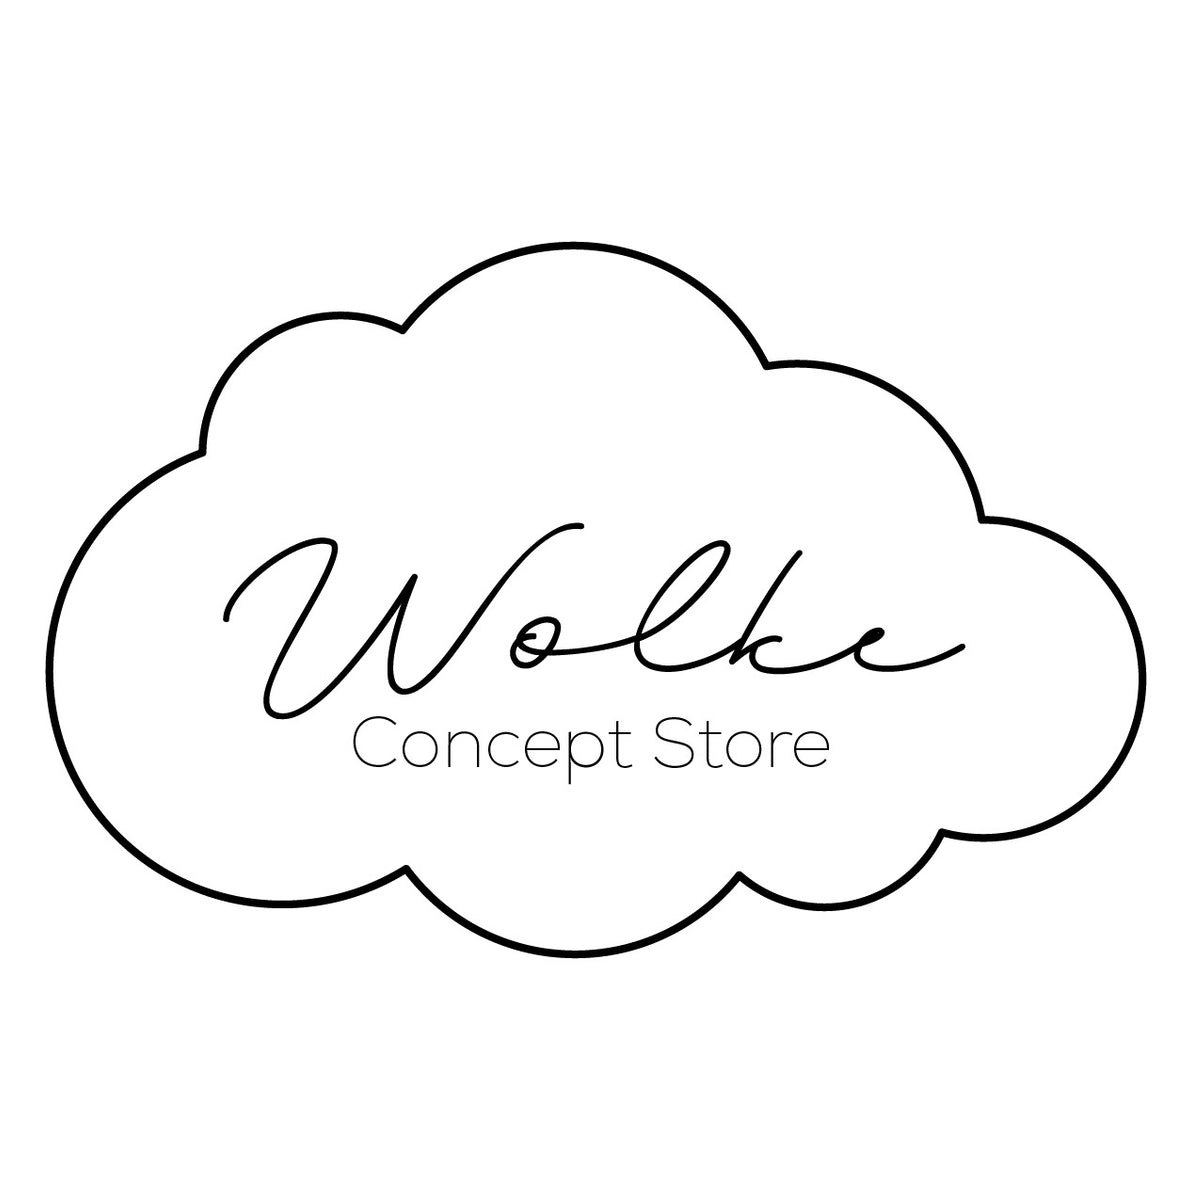 Wolke Concept Store